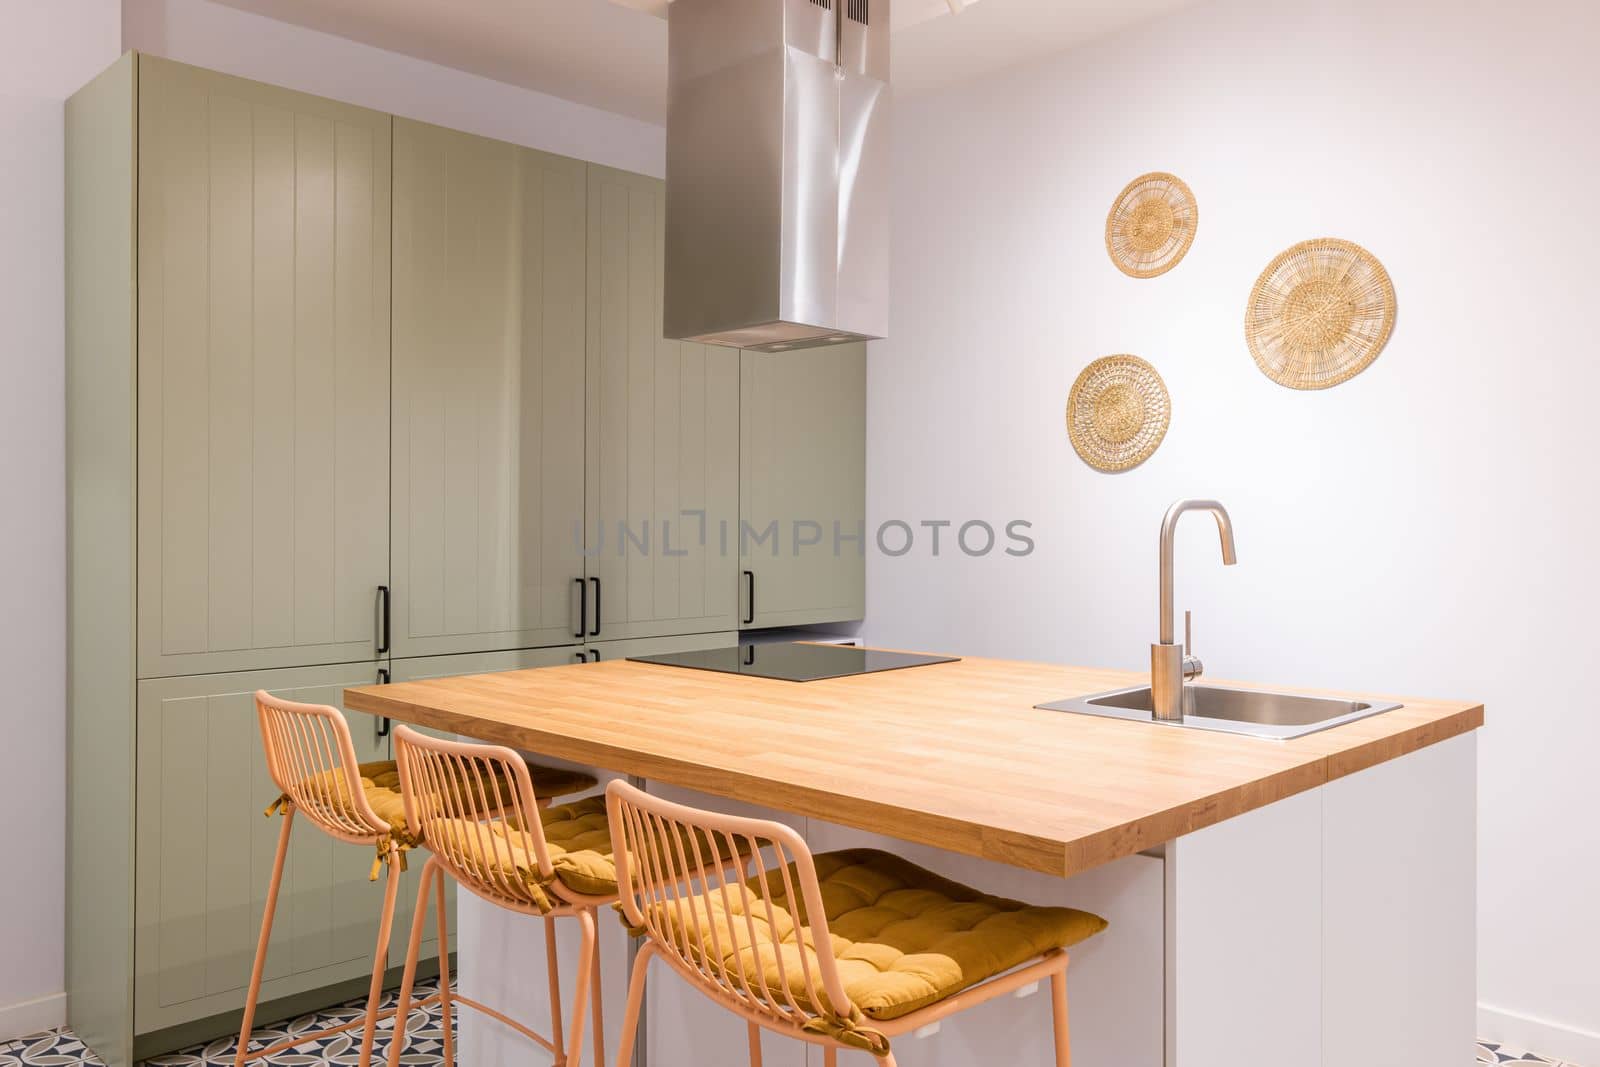 Closeup of kitchen table with trendy design high chairs. Wooden top and chairs in single honey color palette. Countertop has built-in sink and ceramic plate above which exhaust system is located